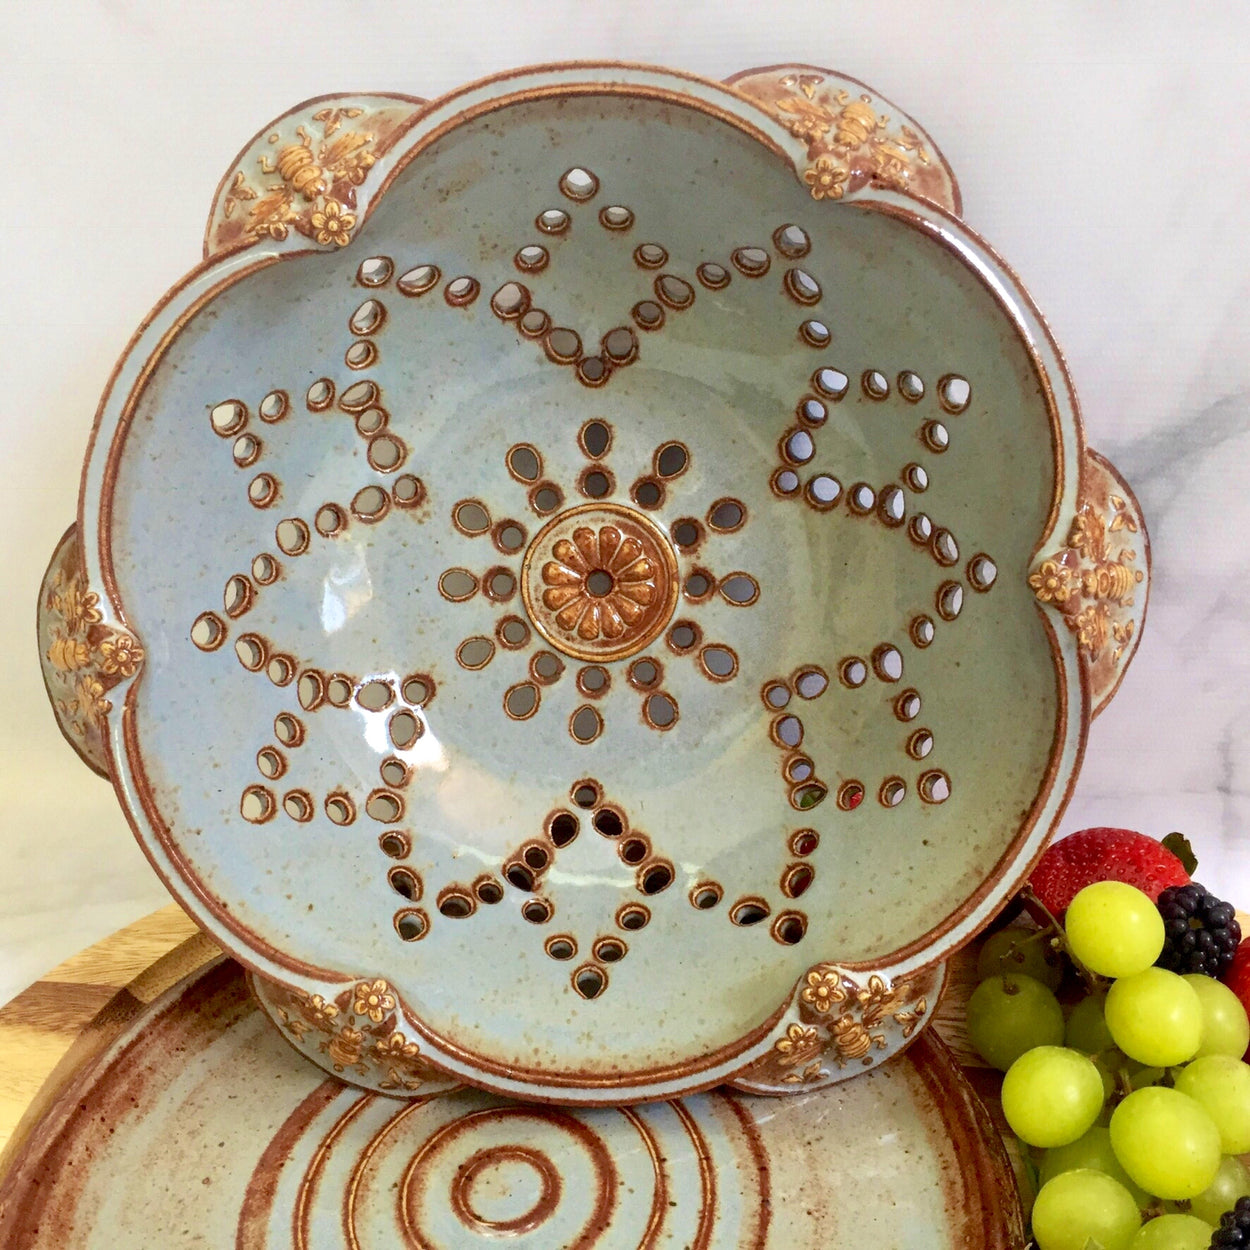 Handcrafted Ceramic Berry Bowls, Dishes and Colanders